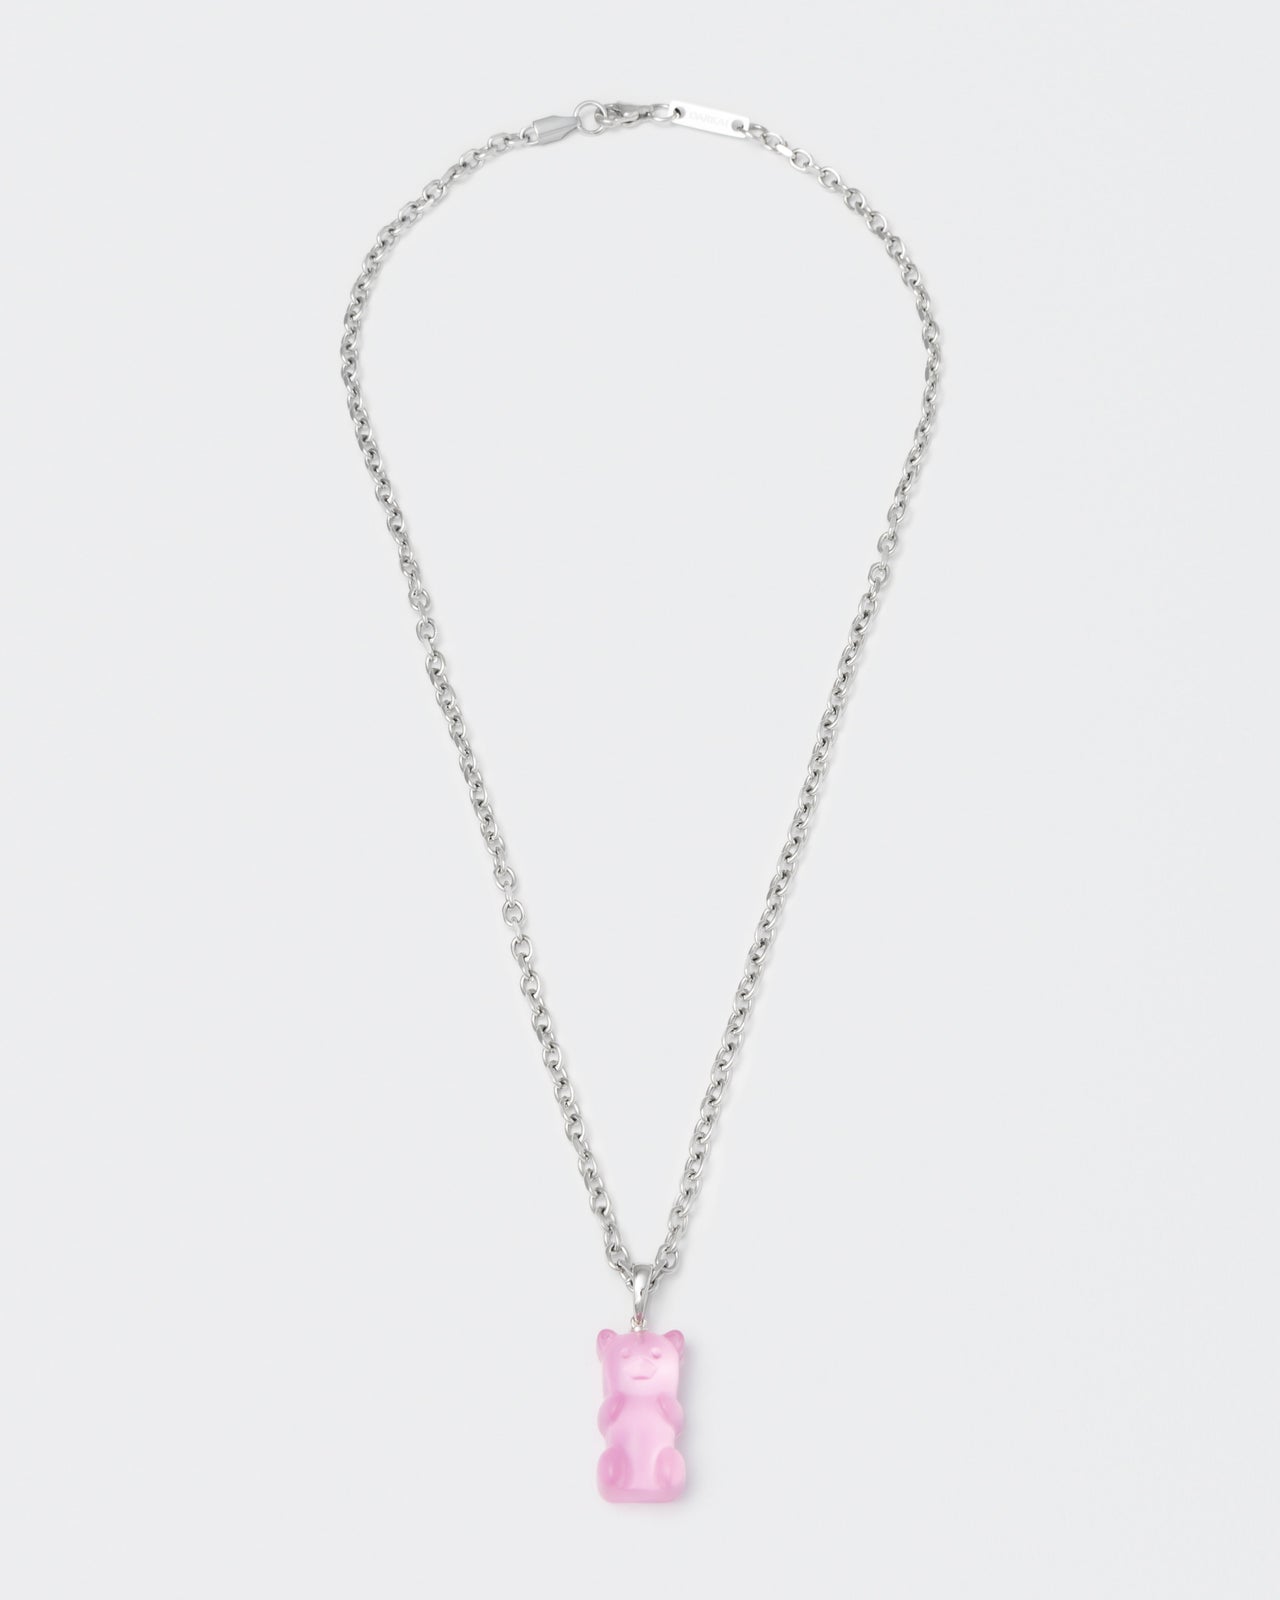 18k white gold coated gummy bear pendant necklace with 3D cut sandblasted crystal in pink and 3mm rolo chain